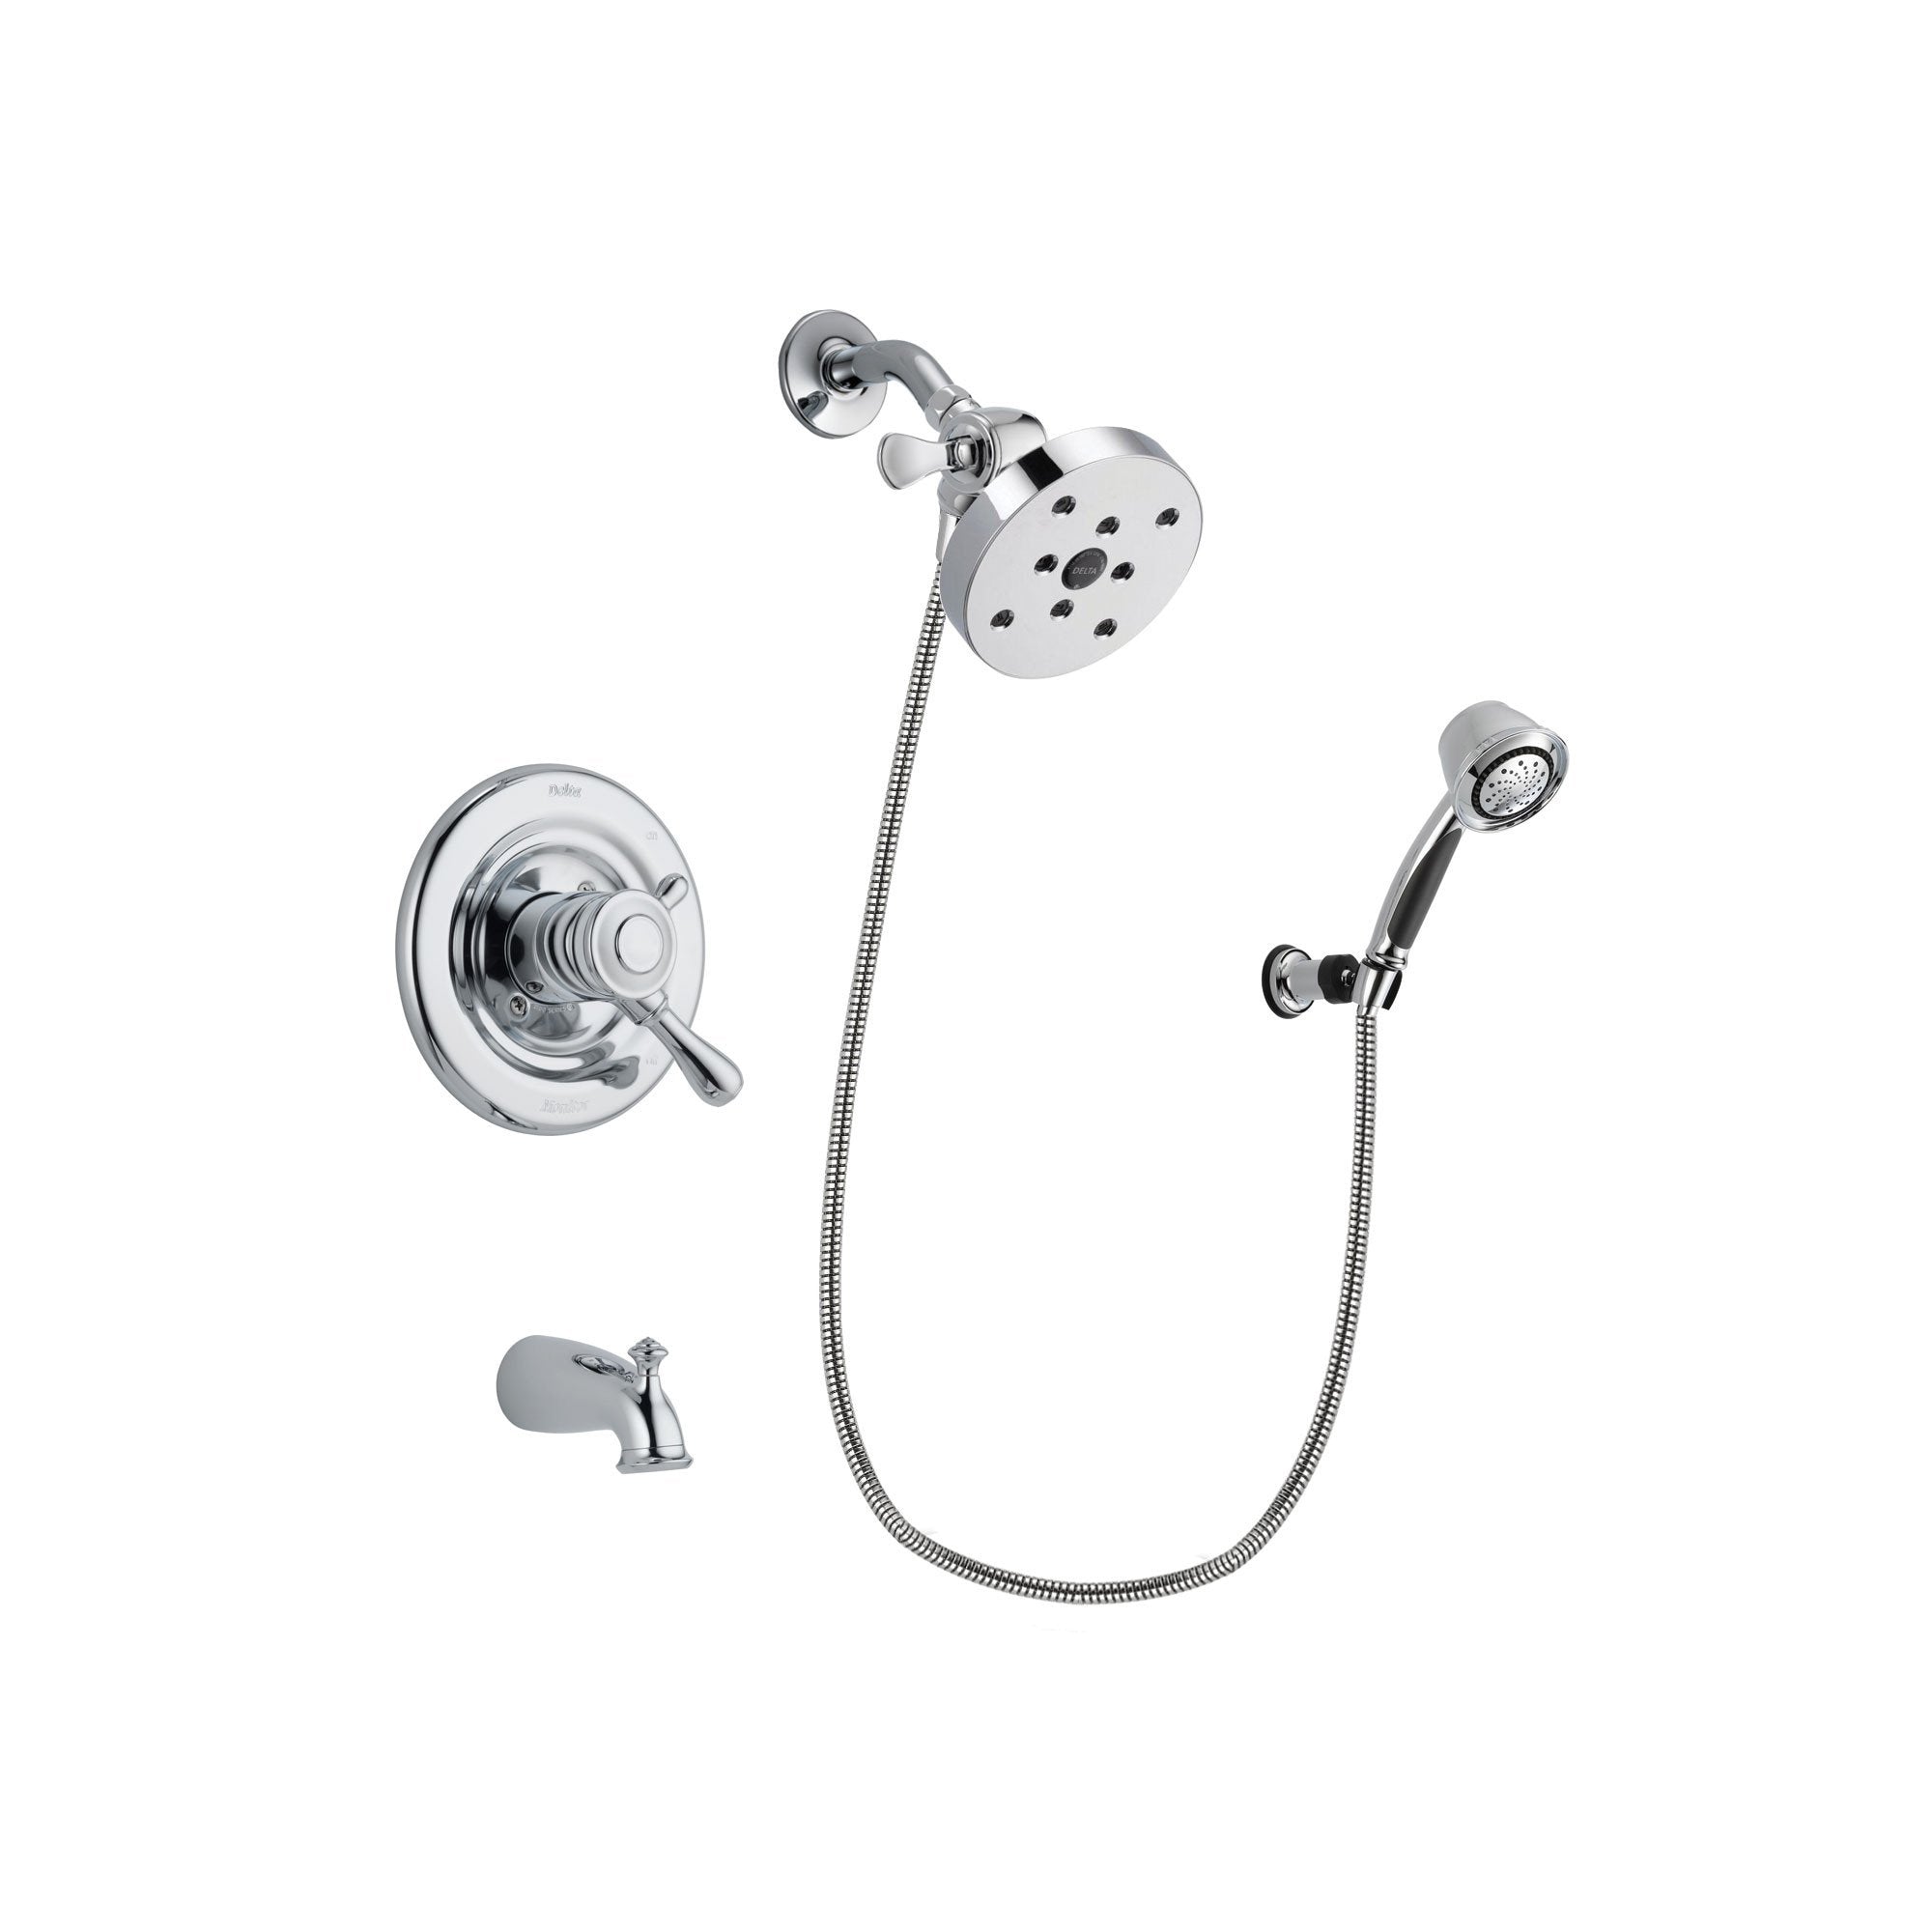 Delta Leland Chrome Finish Dual Control Tub and Shower Faucet System Package with 5-1/2 inch Shower Head and 5-Spray Adjustable Wall Mount Hand Shower Includes Rough-in Valve and Tub Spout DSP0417V